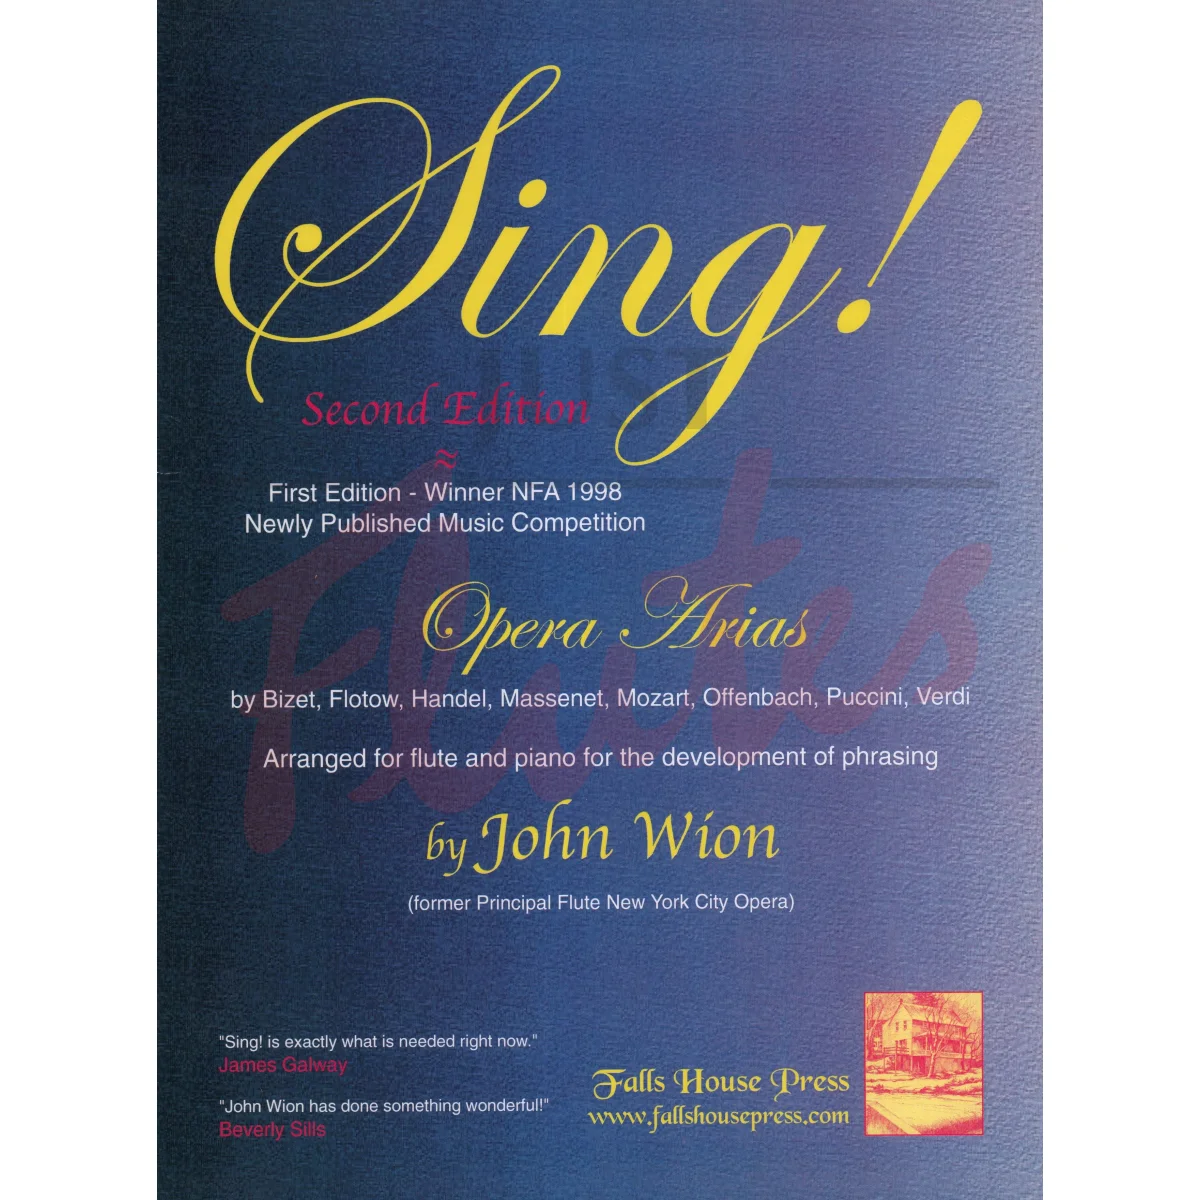 Sing! Opera Arias for Flute and Piano